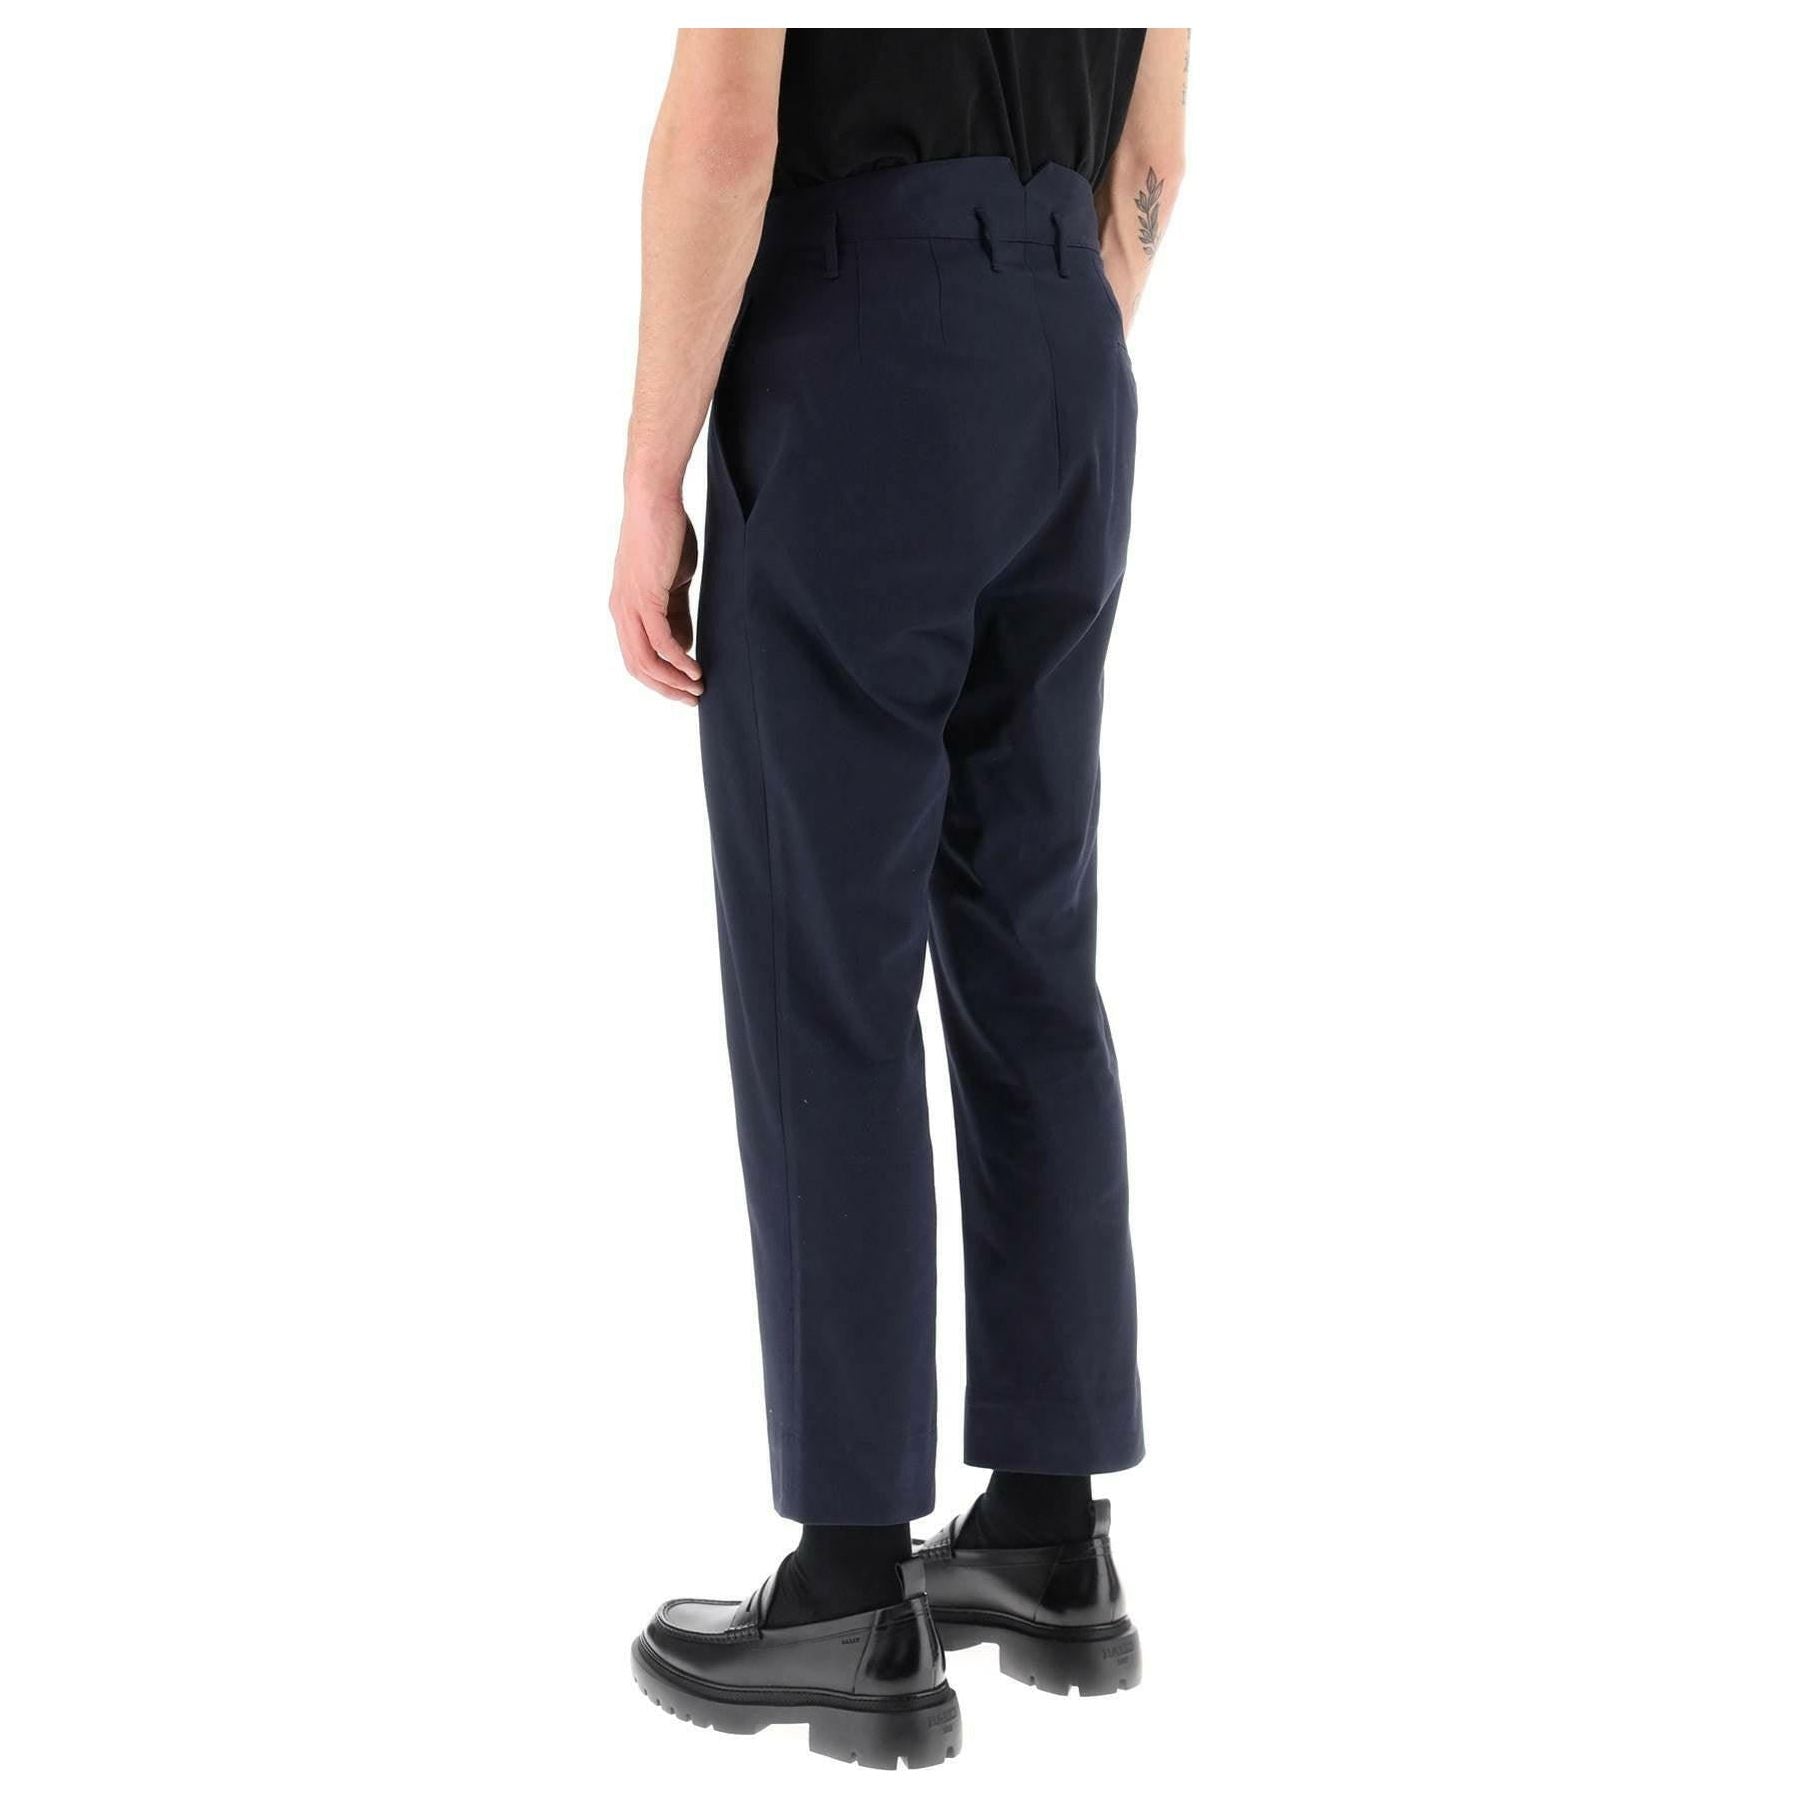 Cropped Cruise Pants Featuring Embroidered Heart Shaped Logo VIVIENNE WESTWOOD JOHN JULIA.